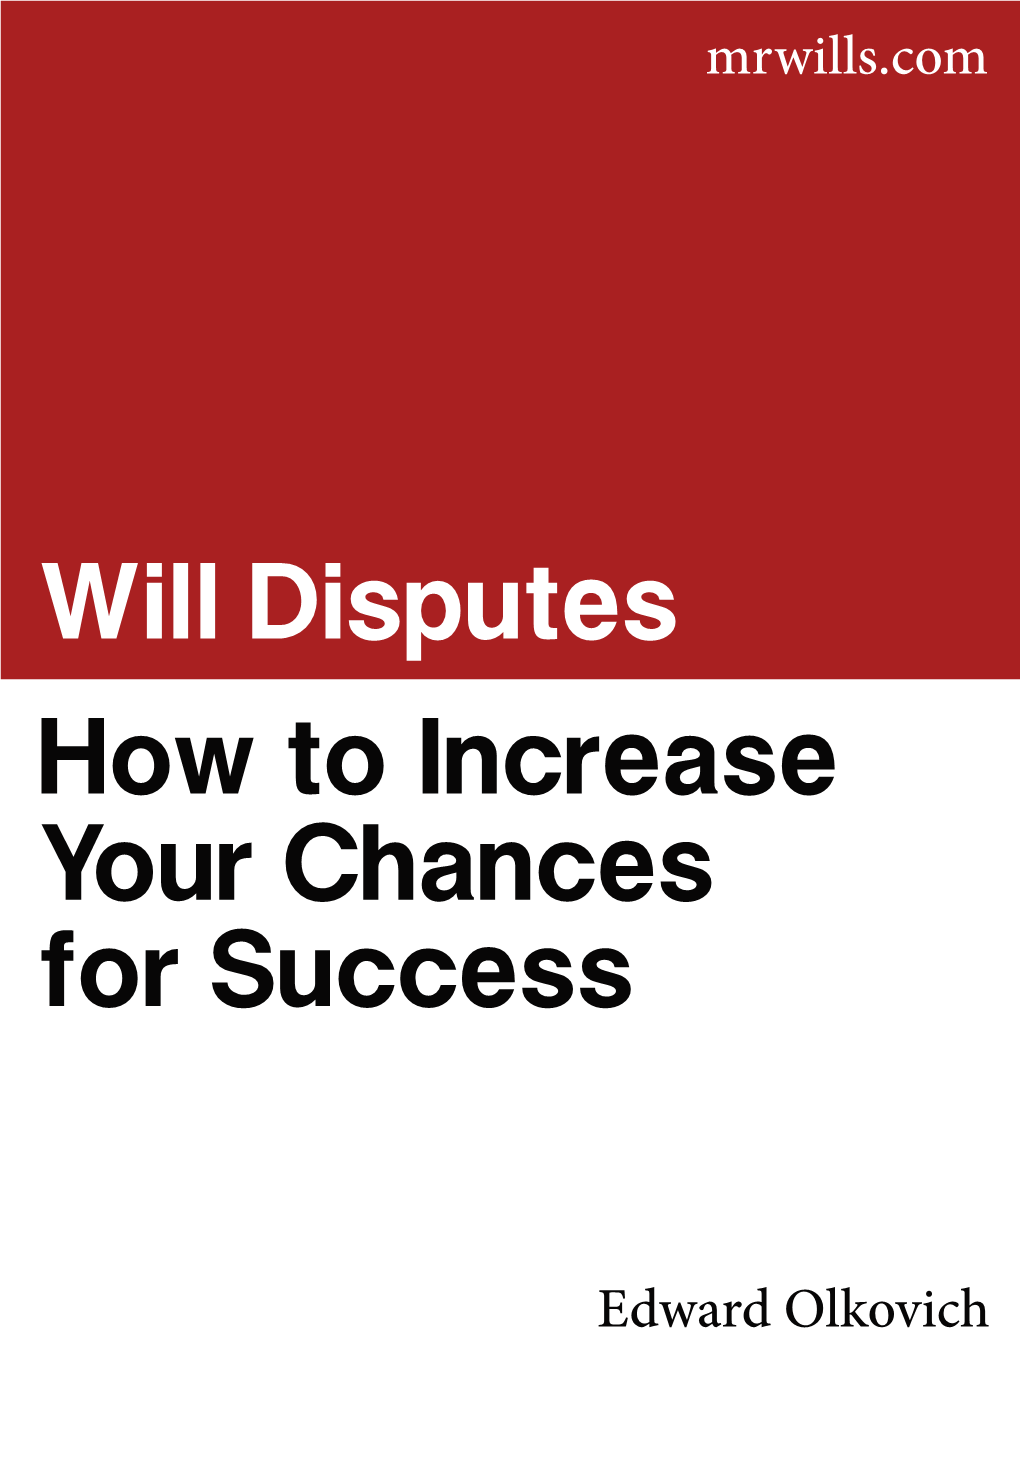 Will Disputes How to Increase Your Chances for Success